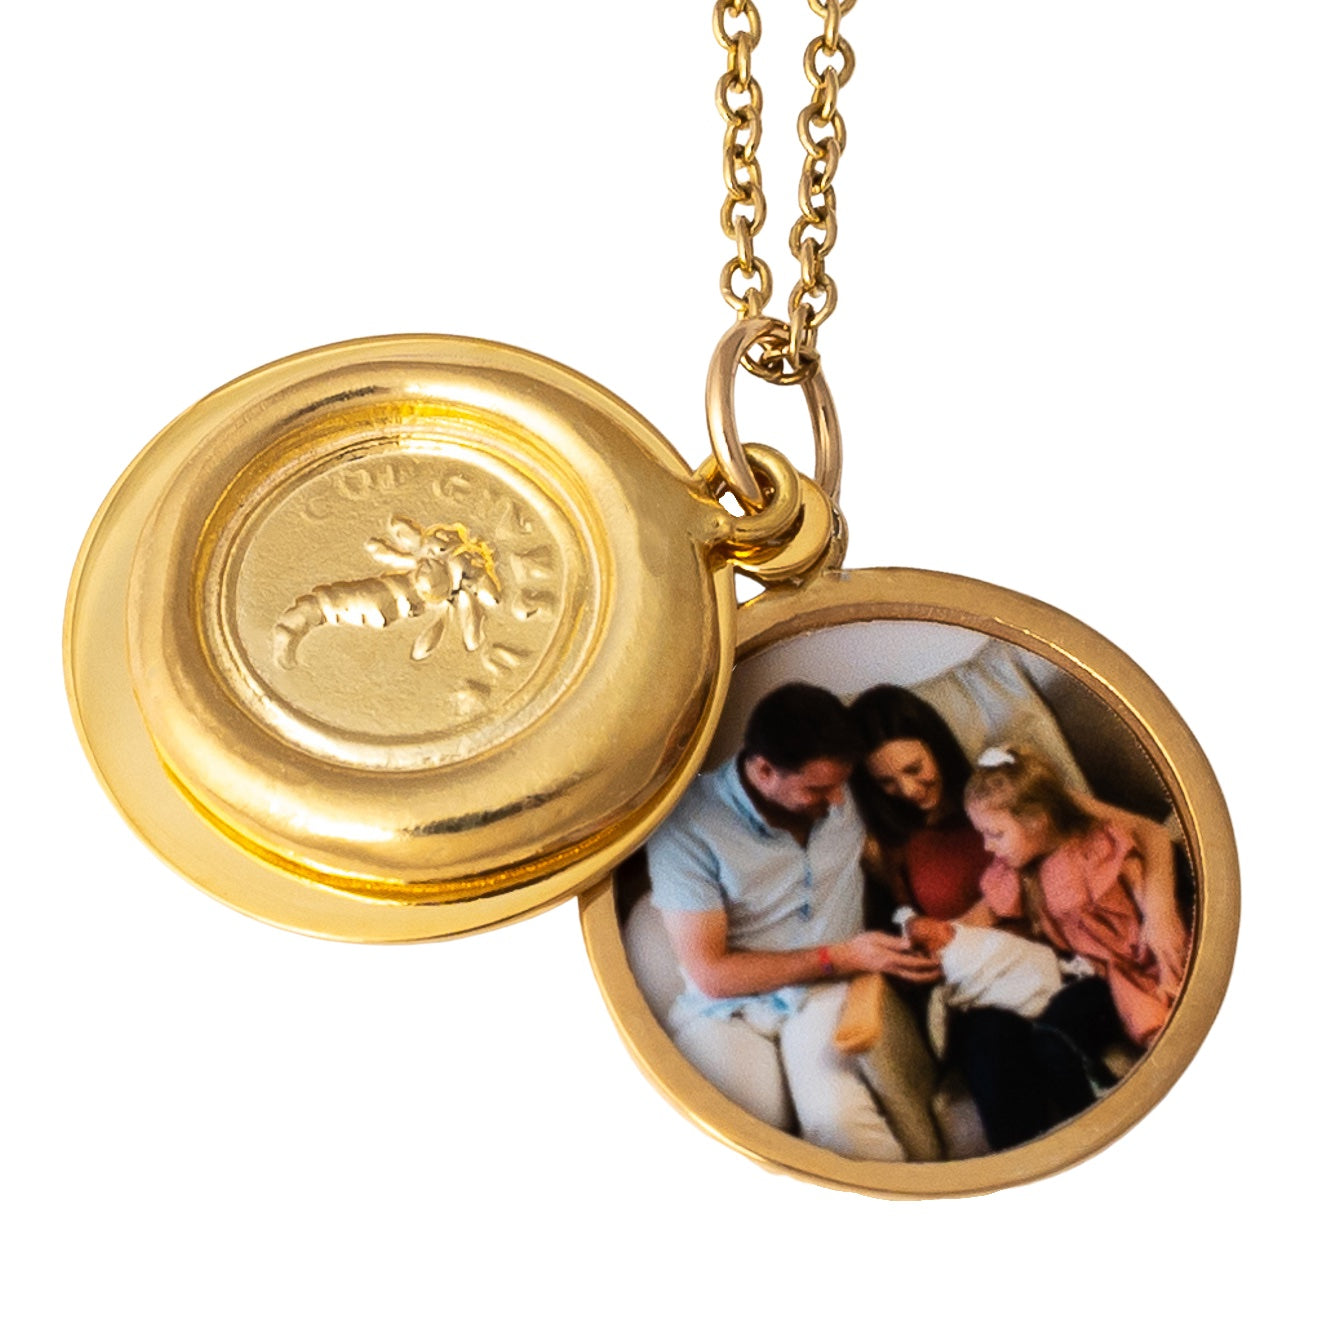 Count Your Blessings Locket